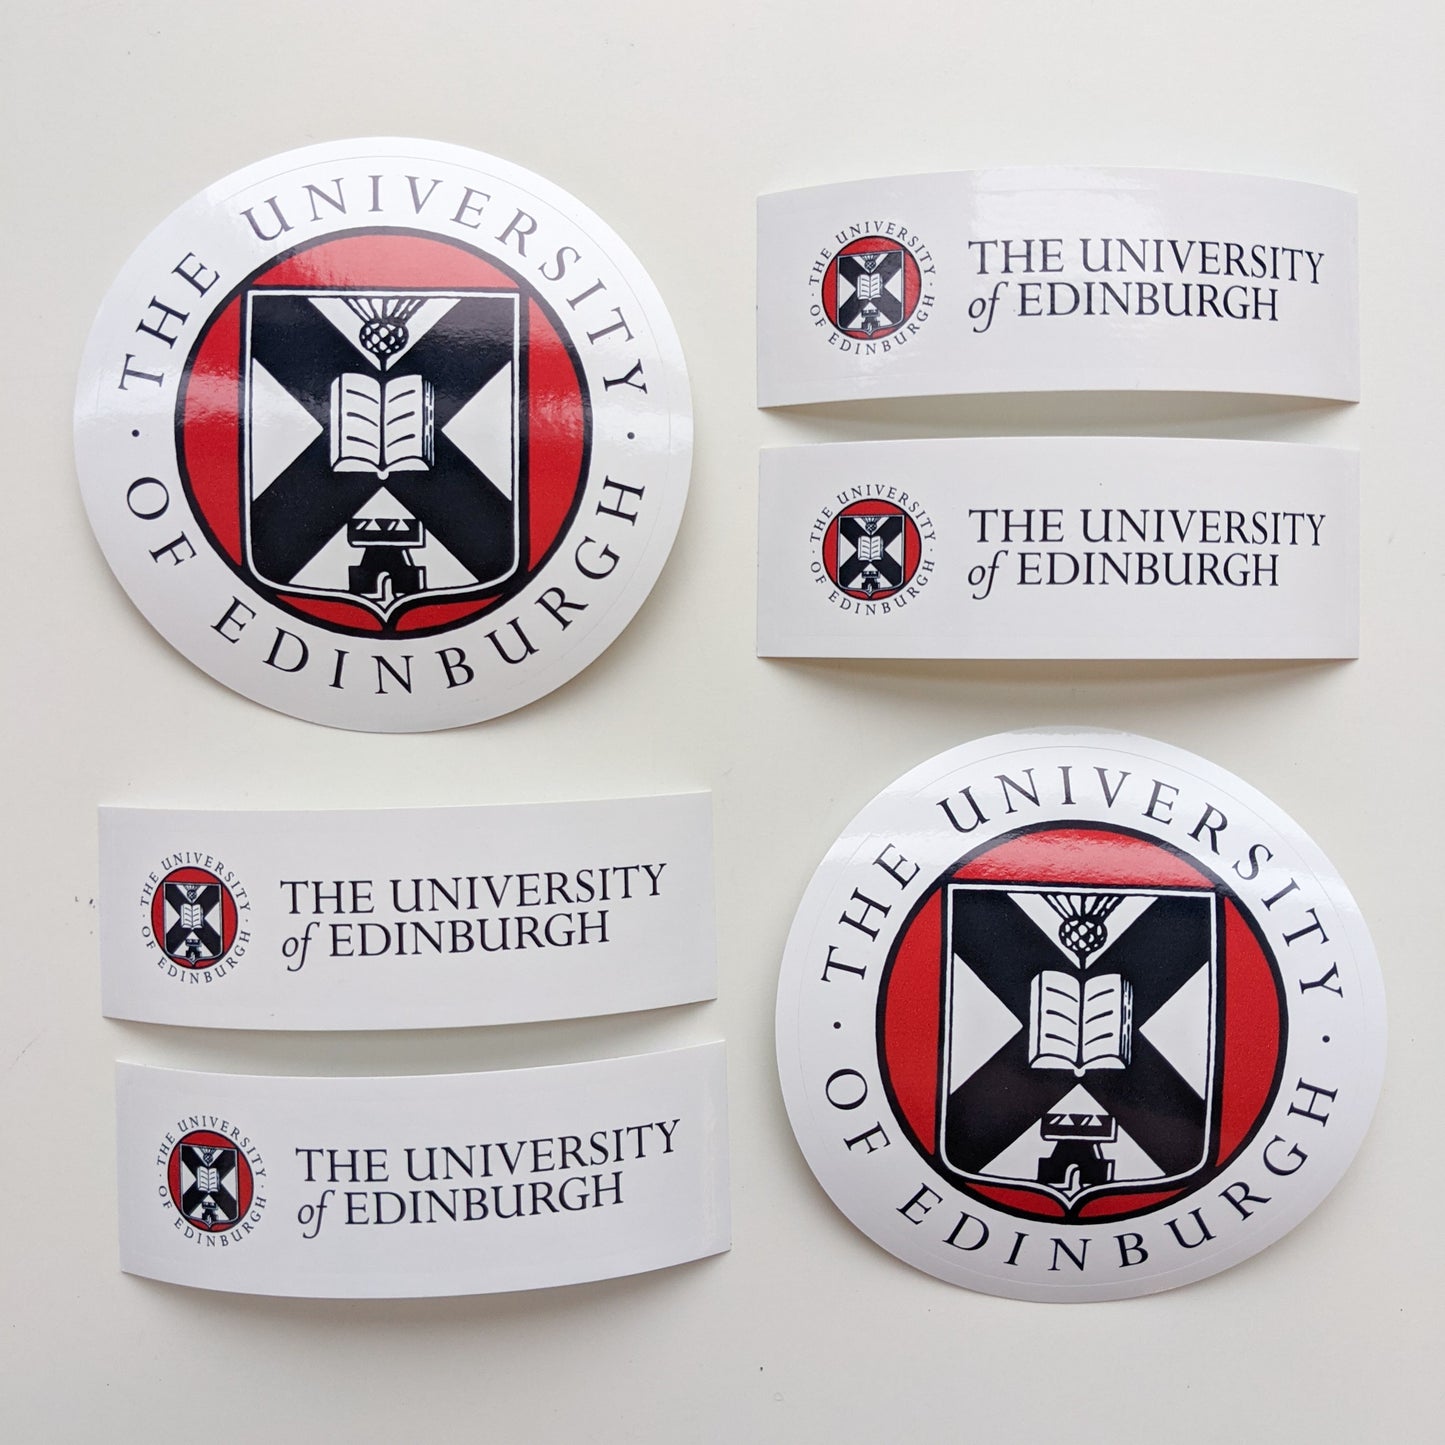 Our sticker range featuring Round Laptop Stickers and Long Laptop Stickers